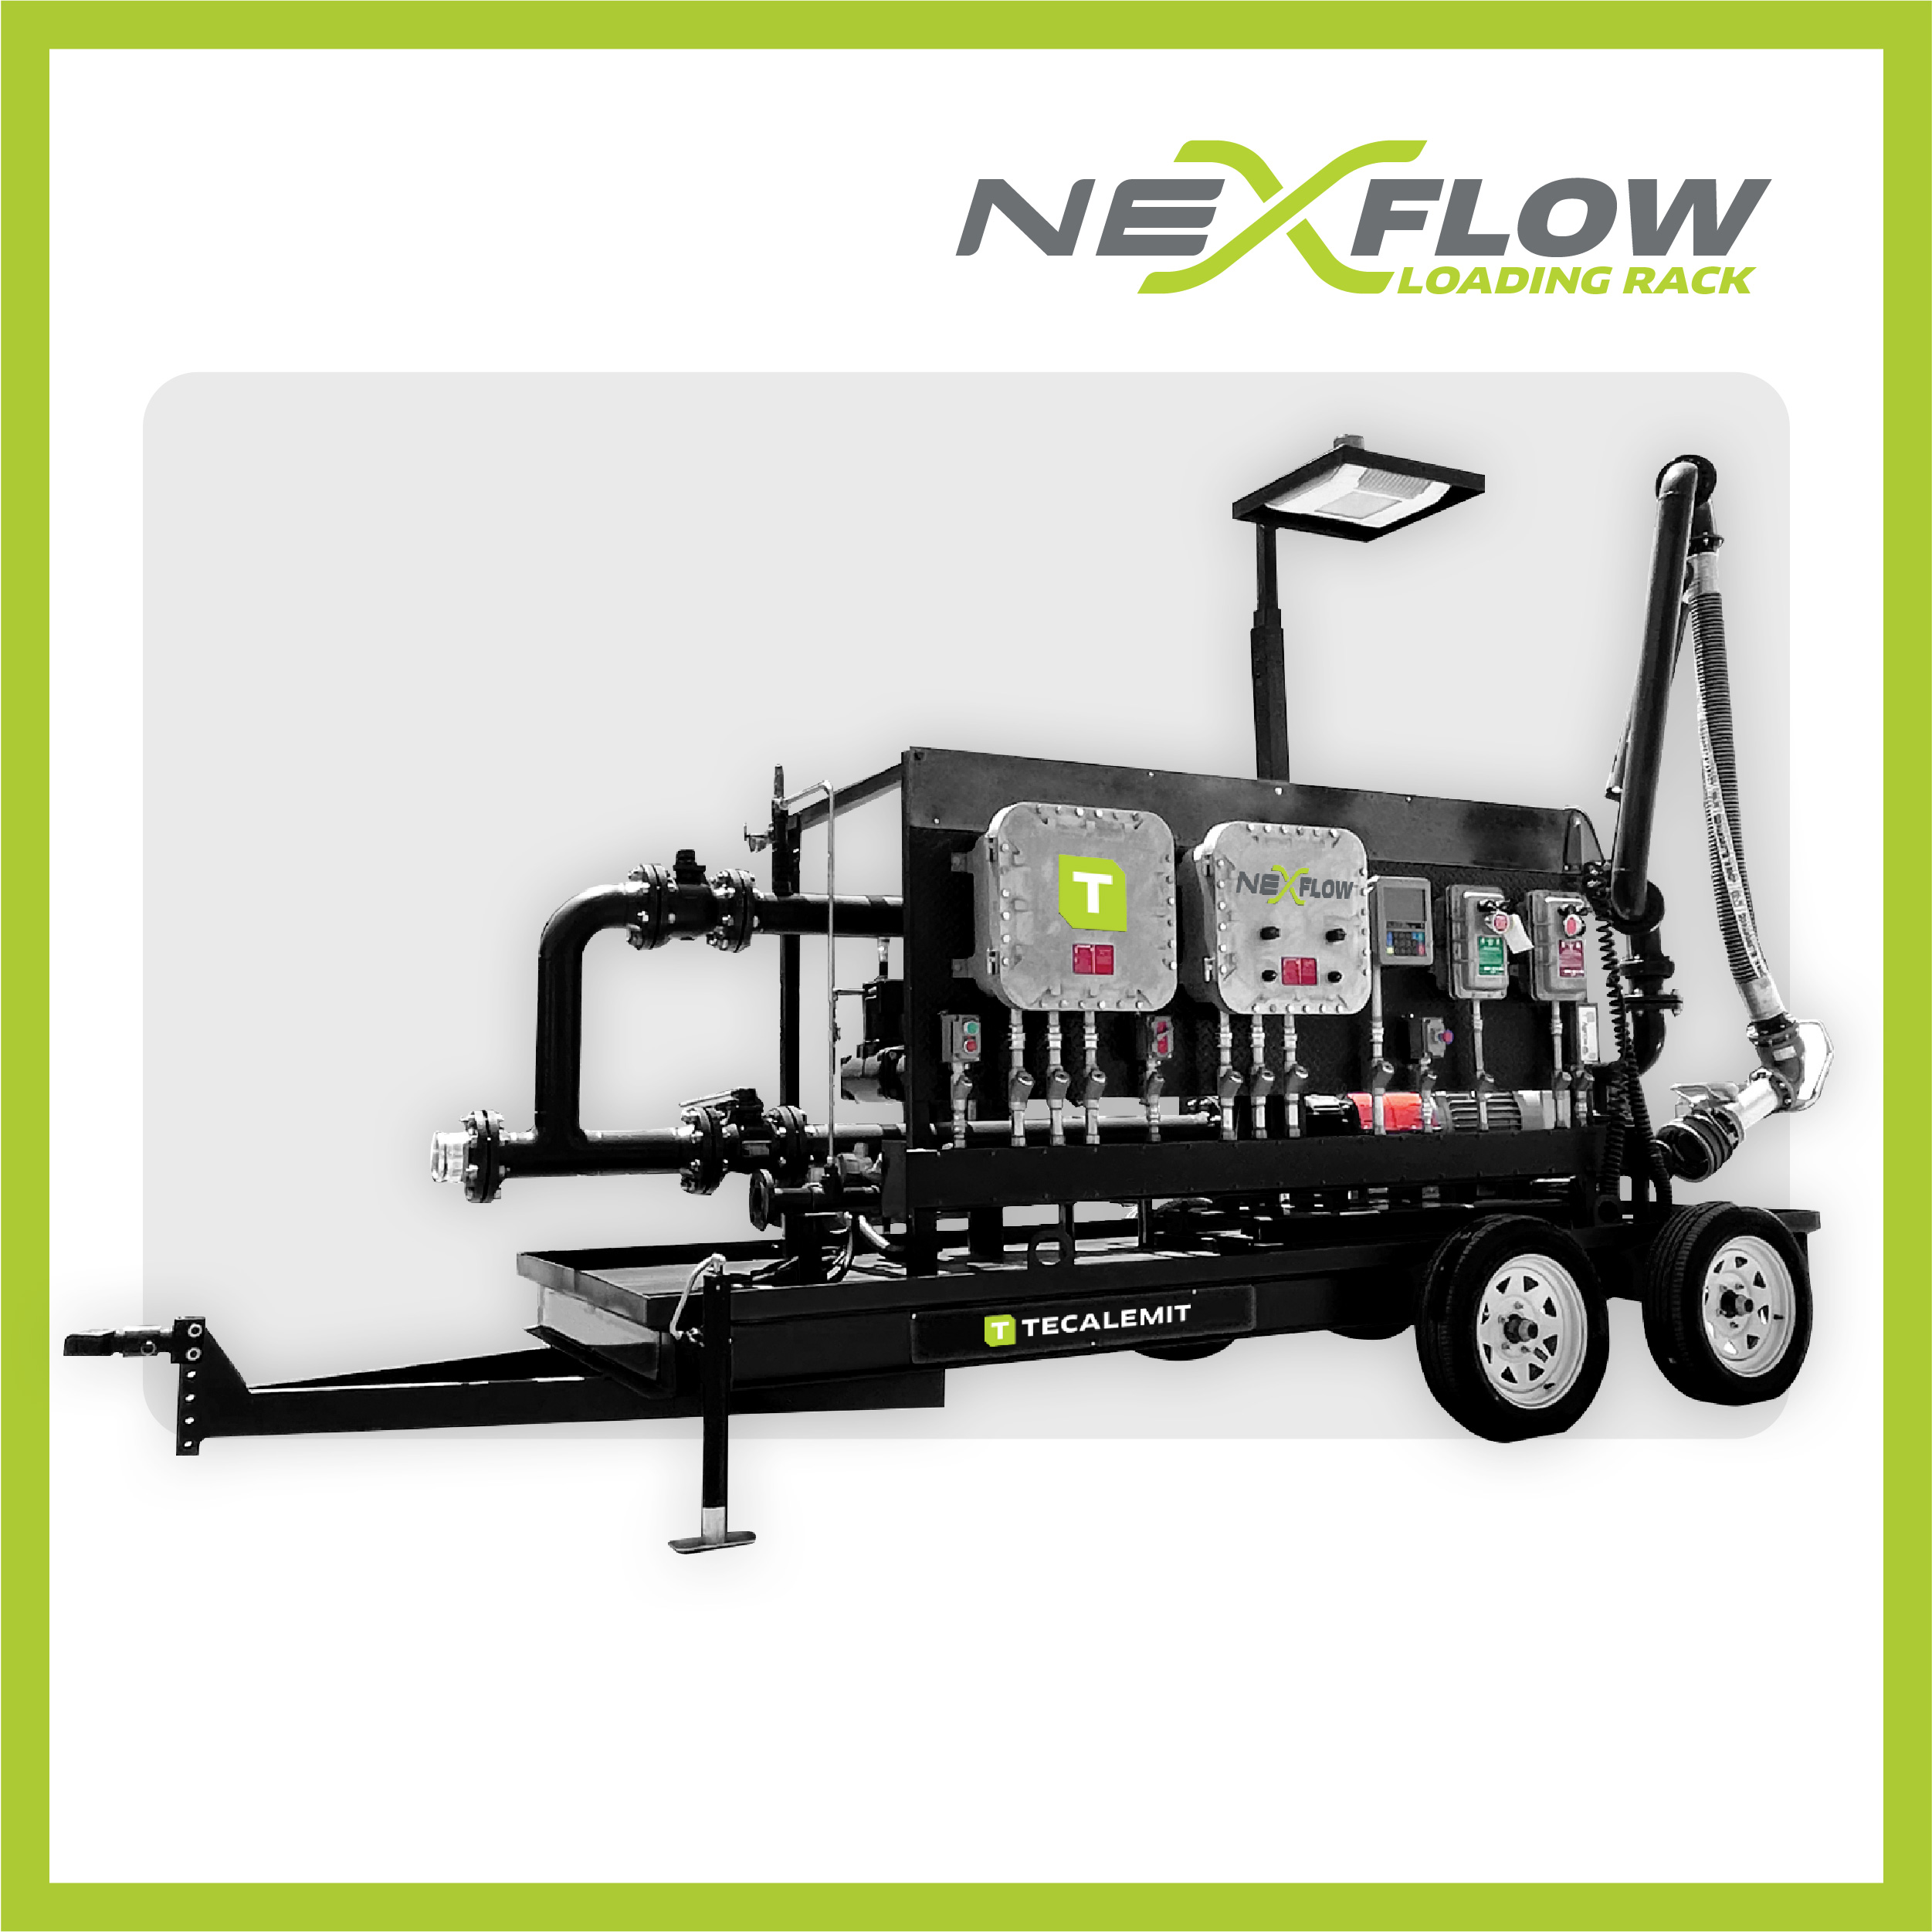 Image of Tecalemit's NexFlow Loading Rack, a versatile and efficient fluid transfer system designed for truck and railcar loading and unloading. Features a sleek, industrial design with adjustable height and mobility options to suit various operational needs. Ideal for single or multi-spot loading areas.